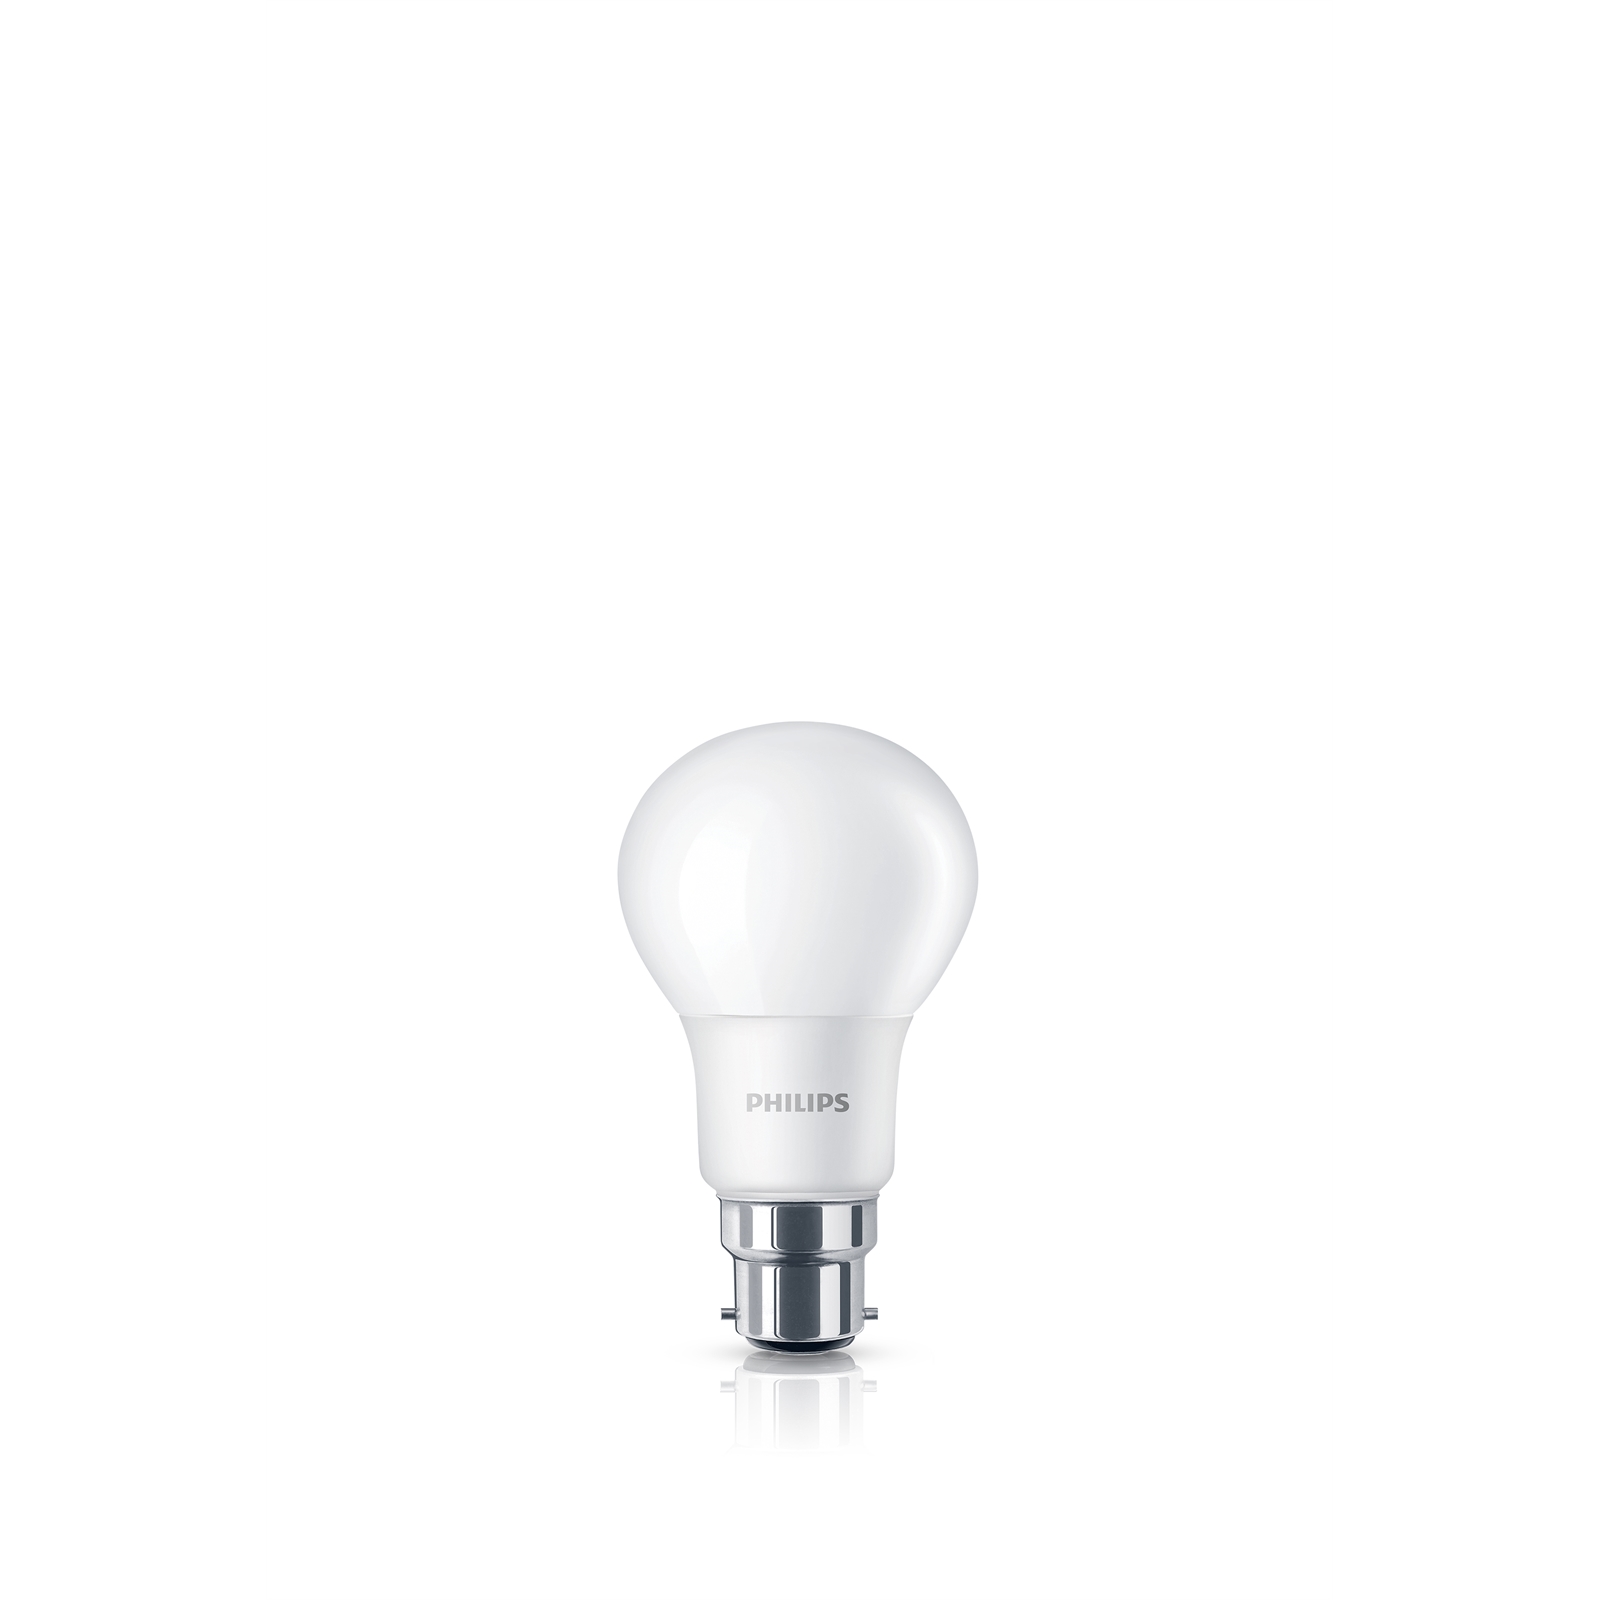 Philips 8.5W LED A Shape Globe Dimmable Warm White